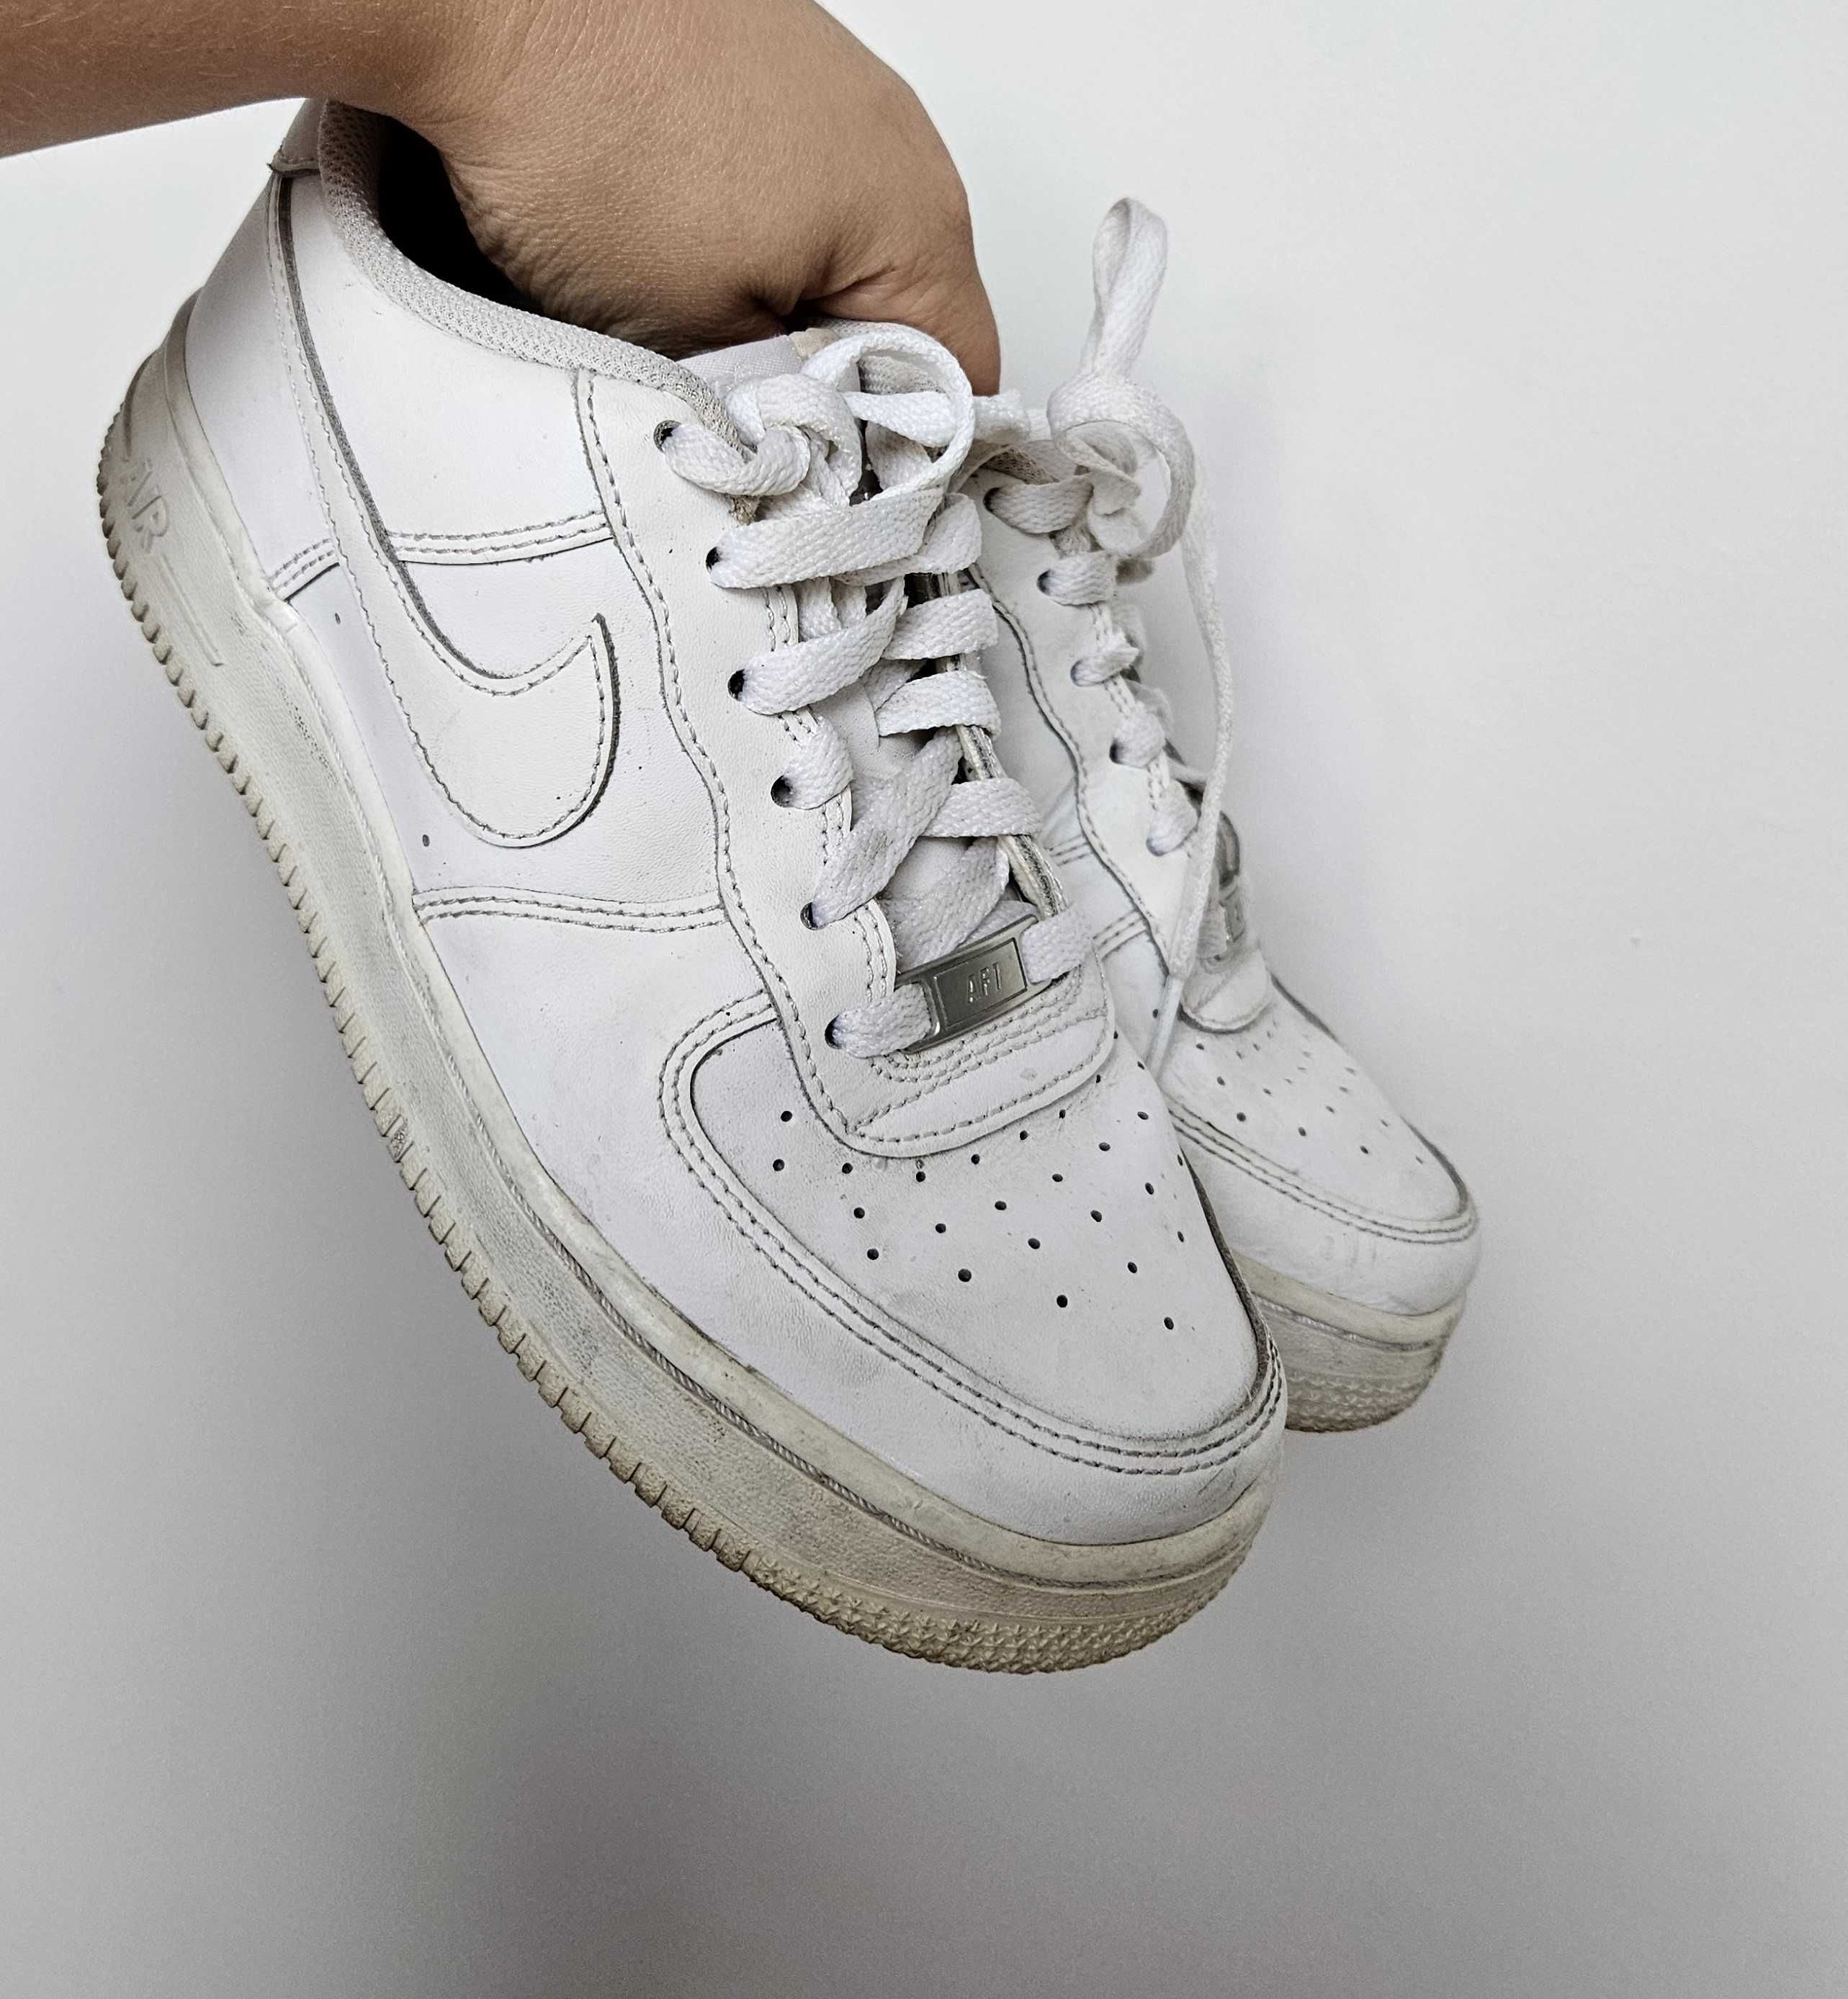 Nike Air Force One Low